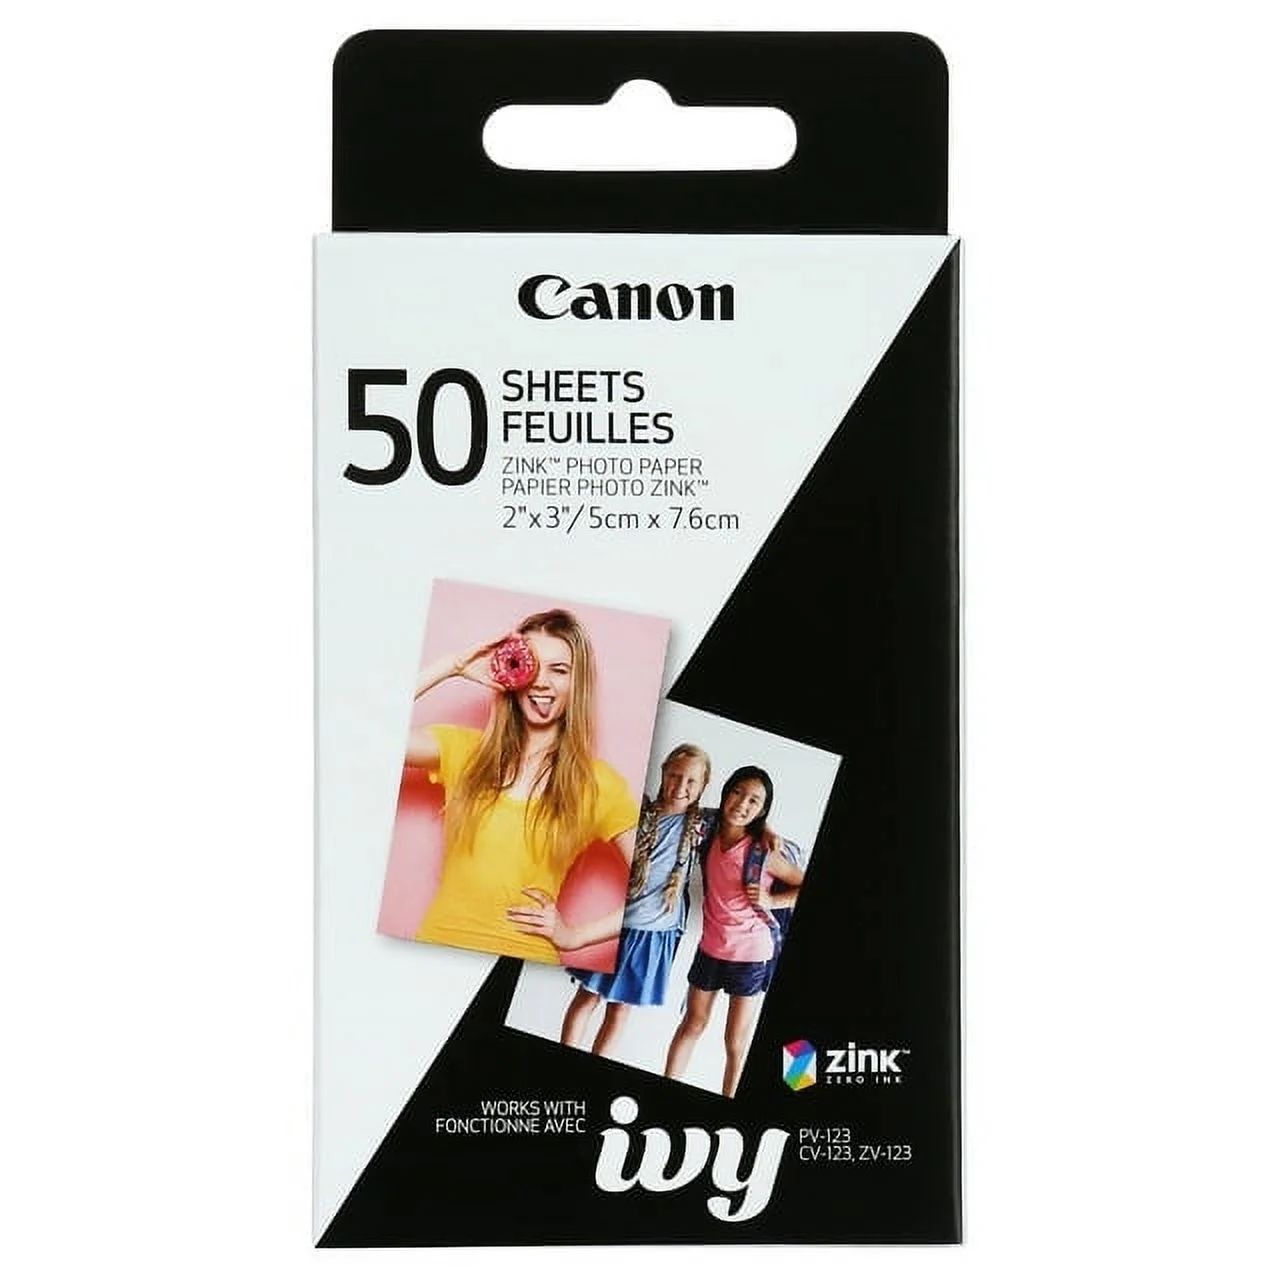 Canon ZINKTM Photo Paper Pack - 50 Sheets | Walmart (US)